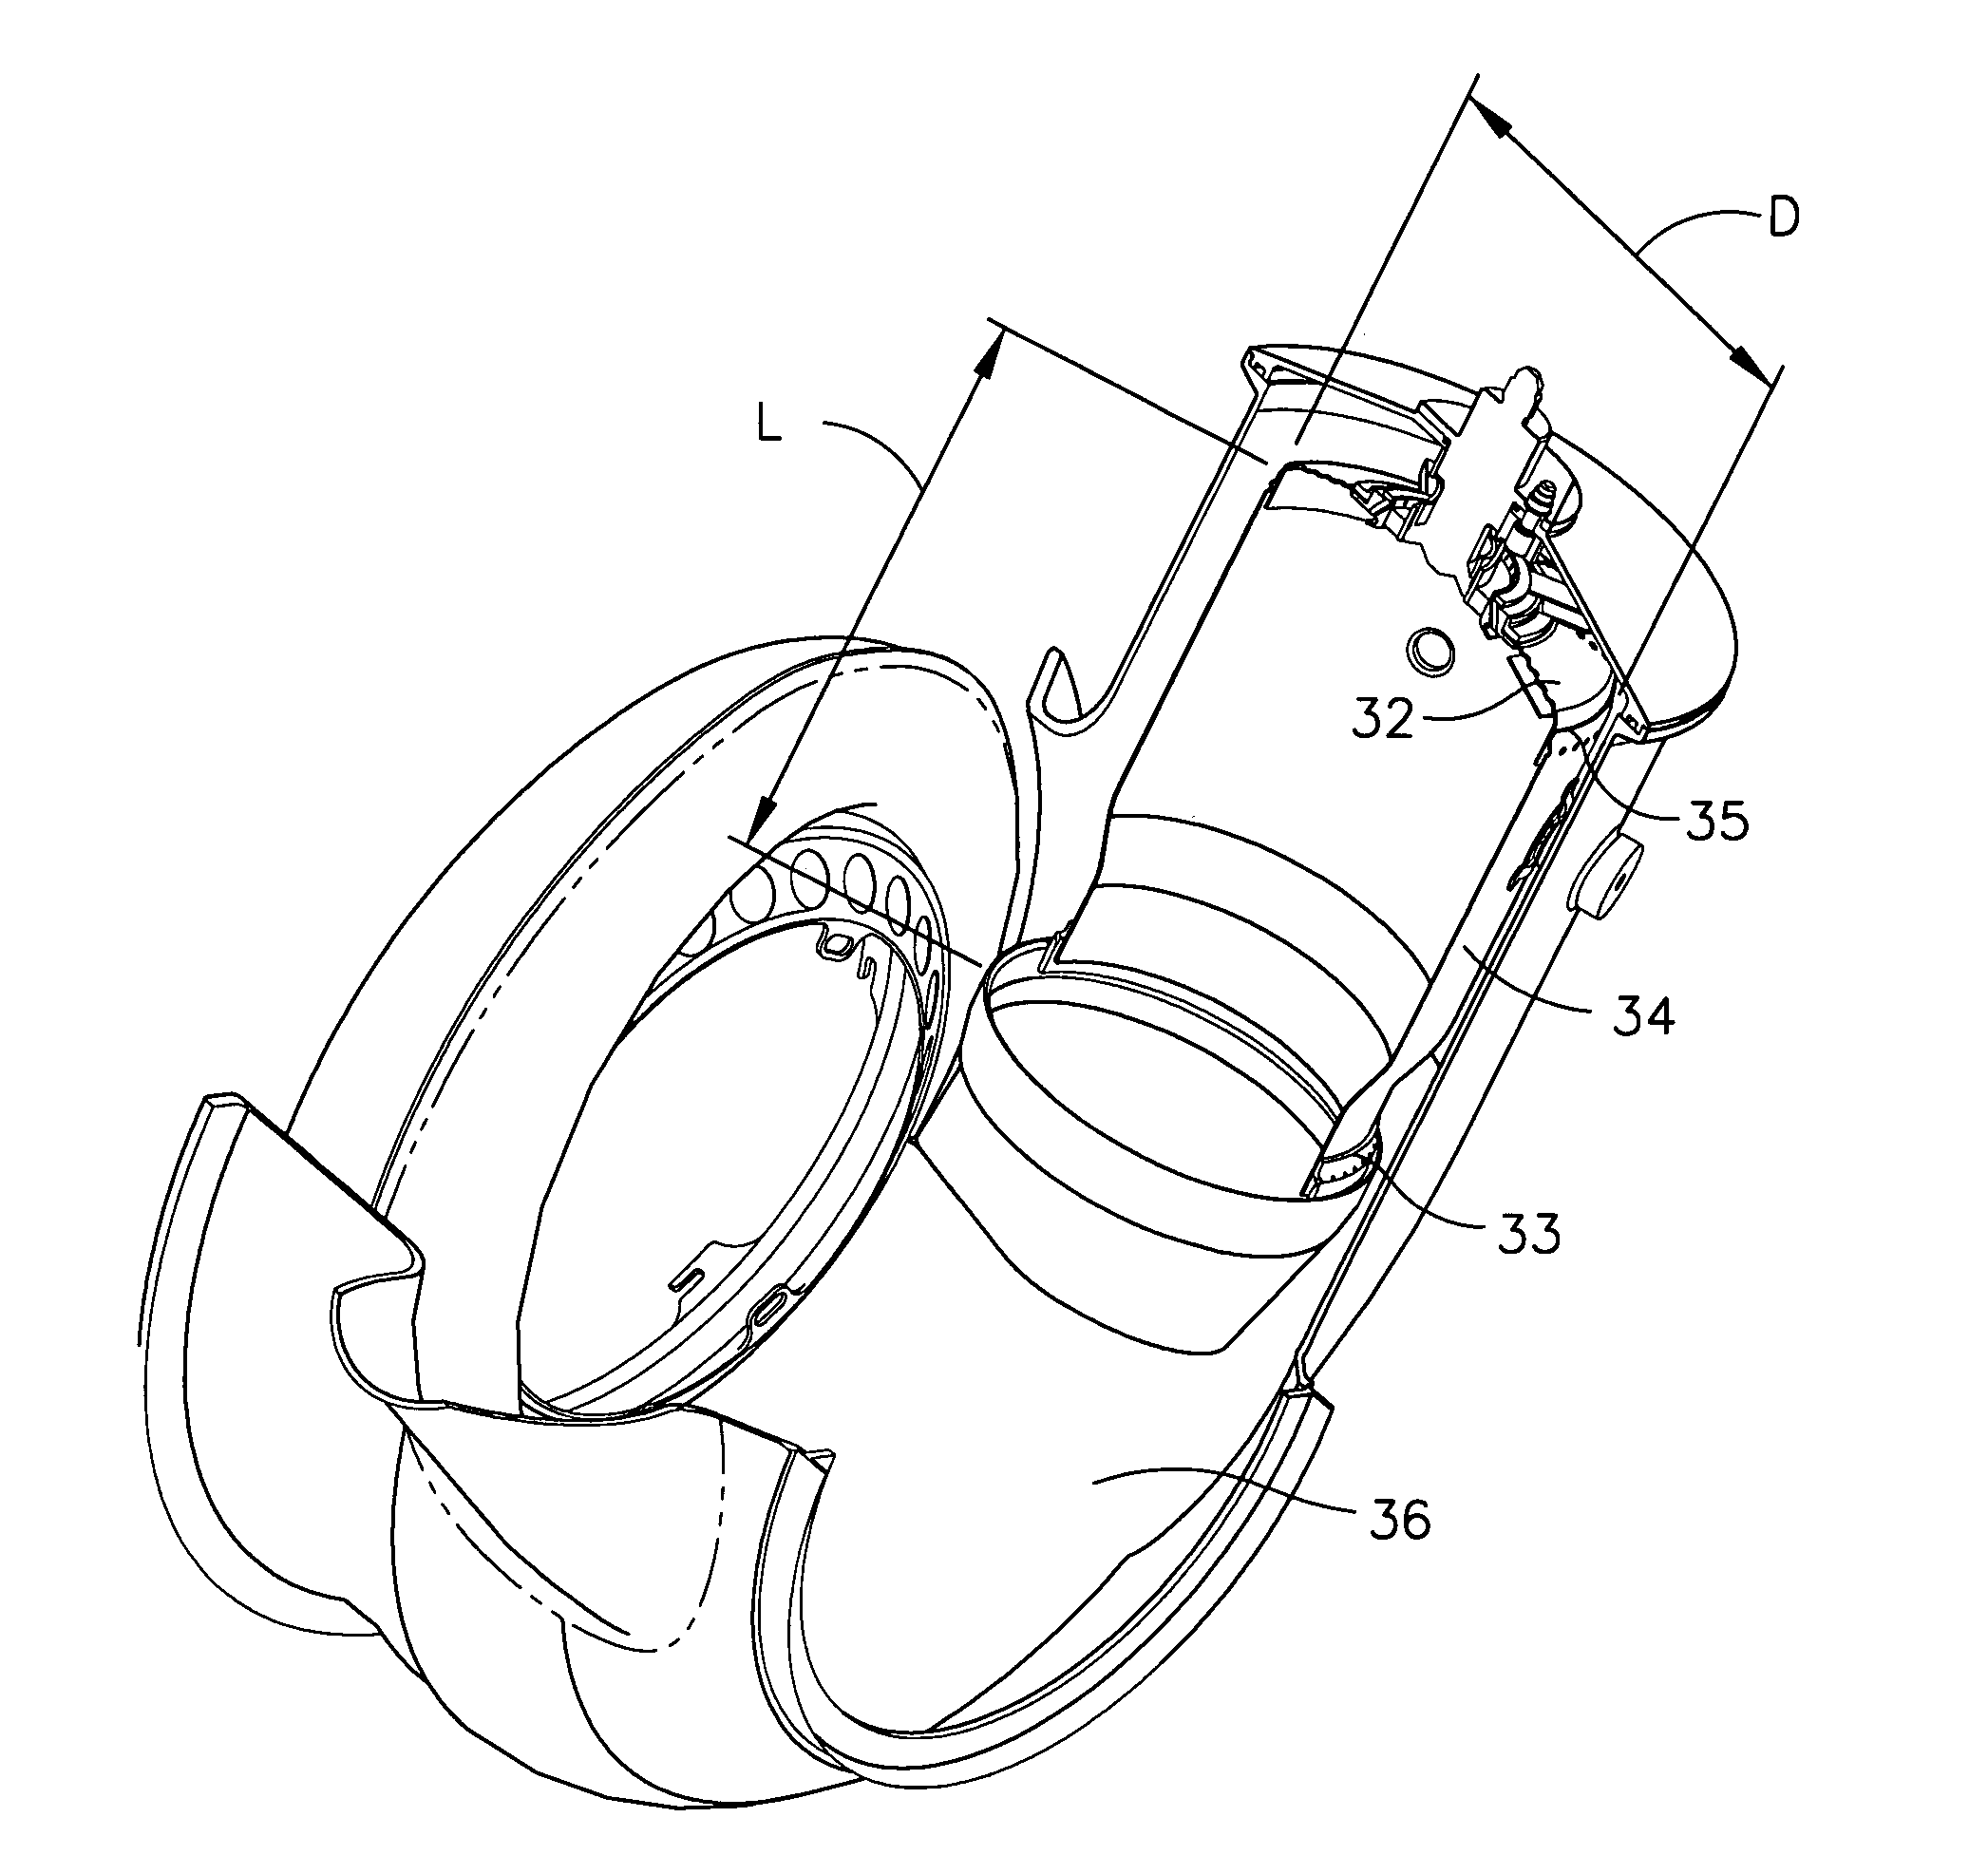 Uniform effusion cooling method for a can combustion chamber